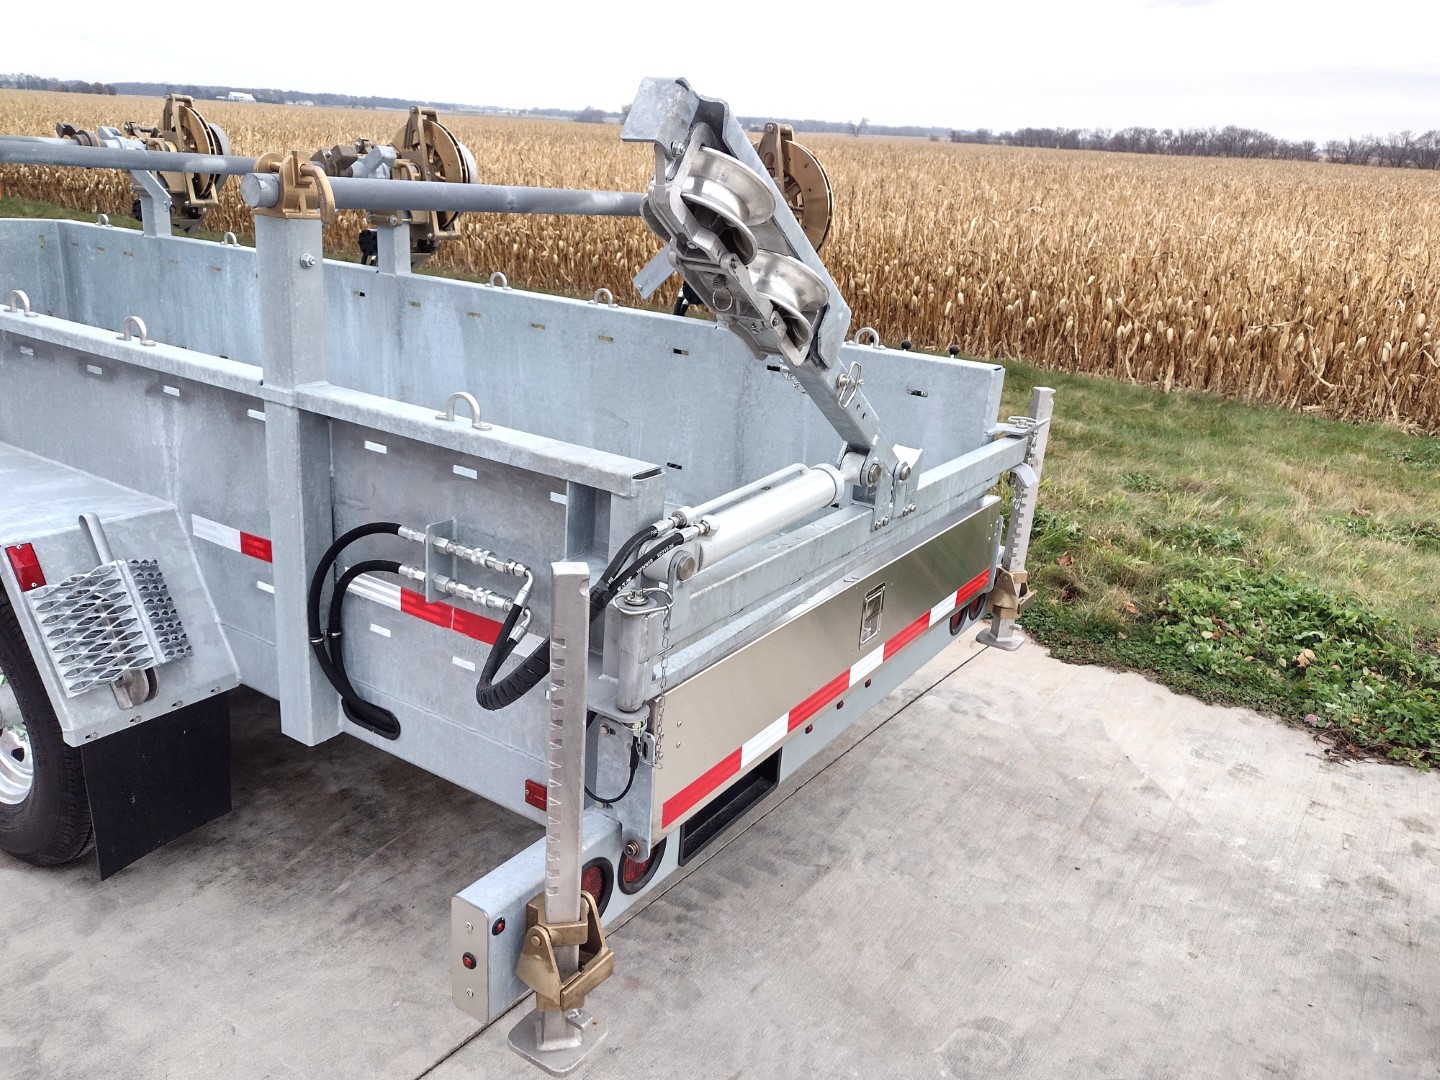 Rear tight view of level wind system mounted on a Sauber Mfg. Co. Model 1530 Three Reel Trailer. The trailer is shown in front grass strip and golden corn field.